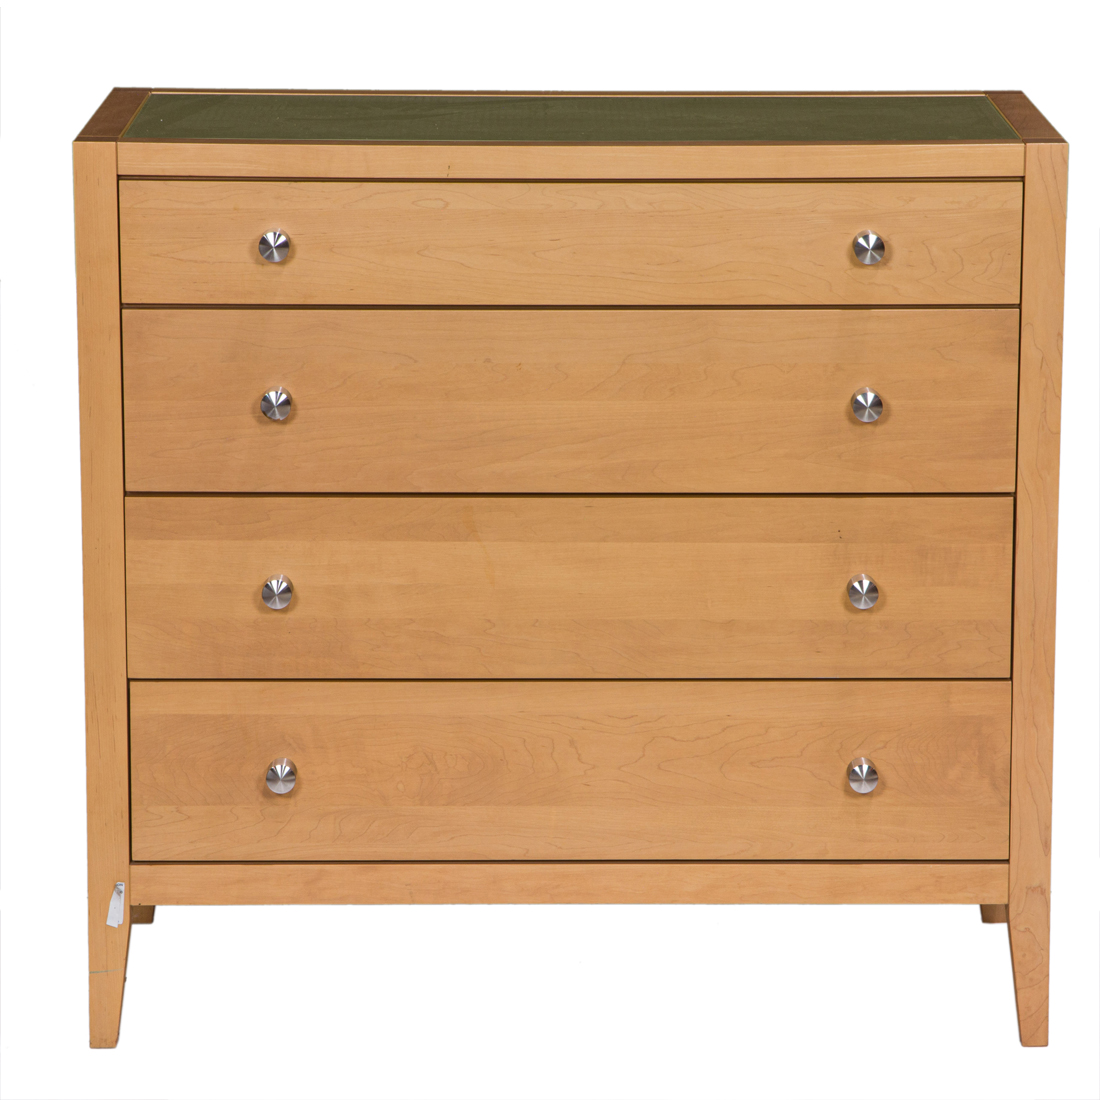 A BARONET OF CANADA MAPLE FOUR-DRAWER